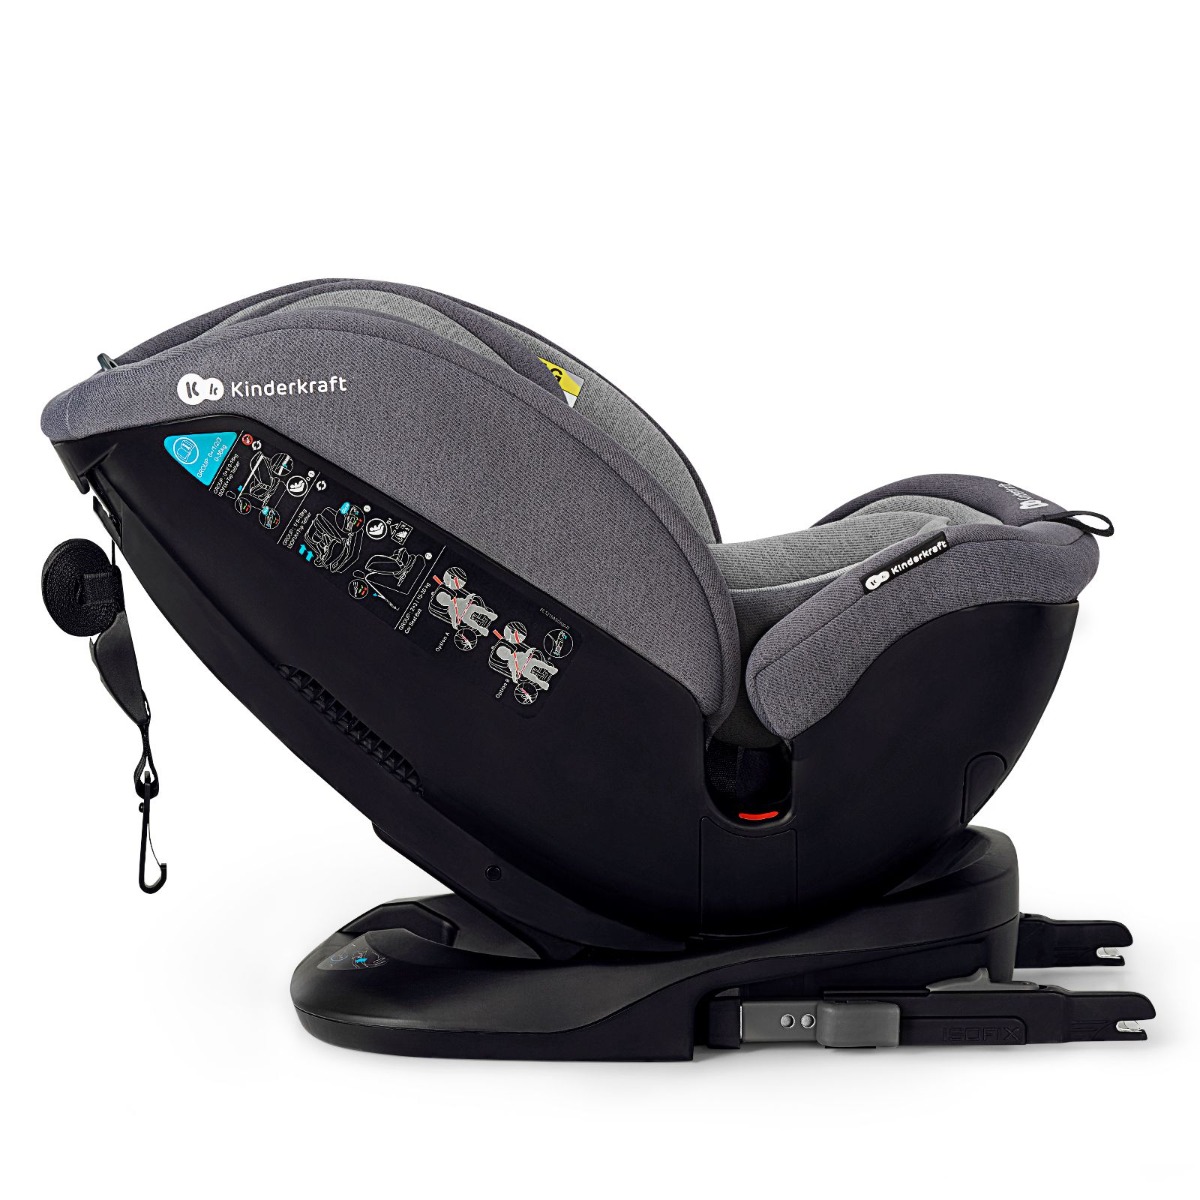 Car seat XPEDITION